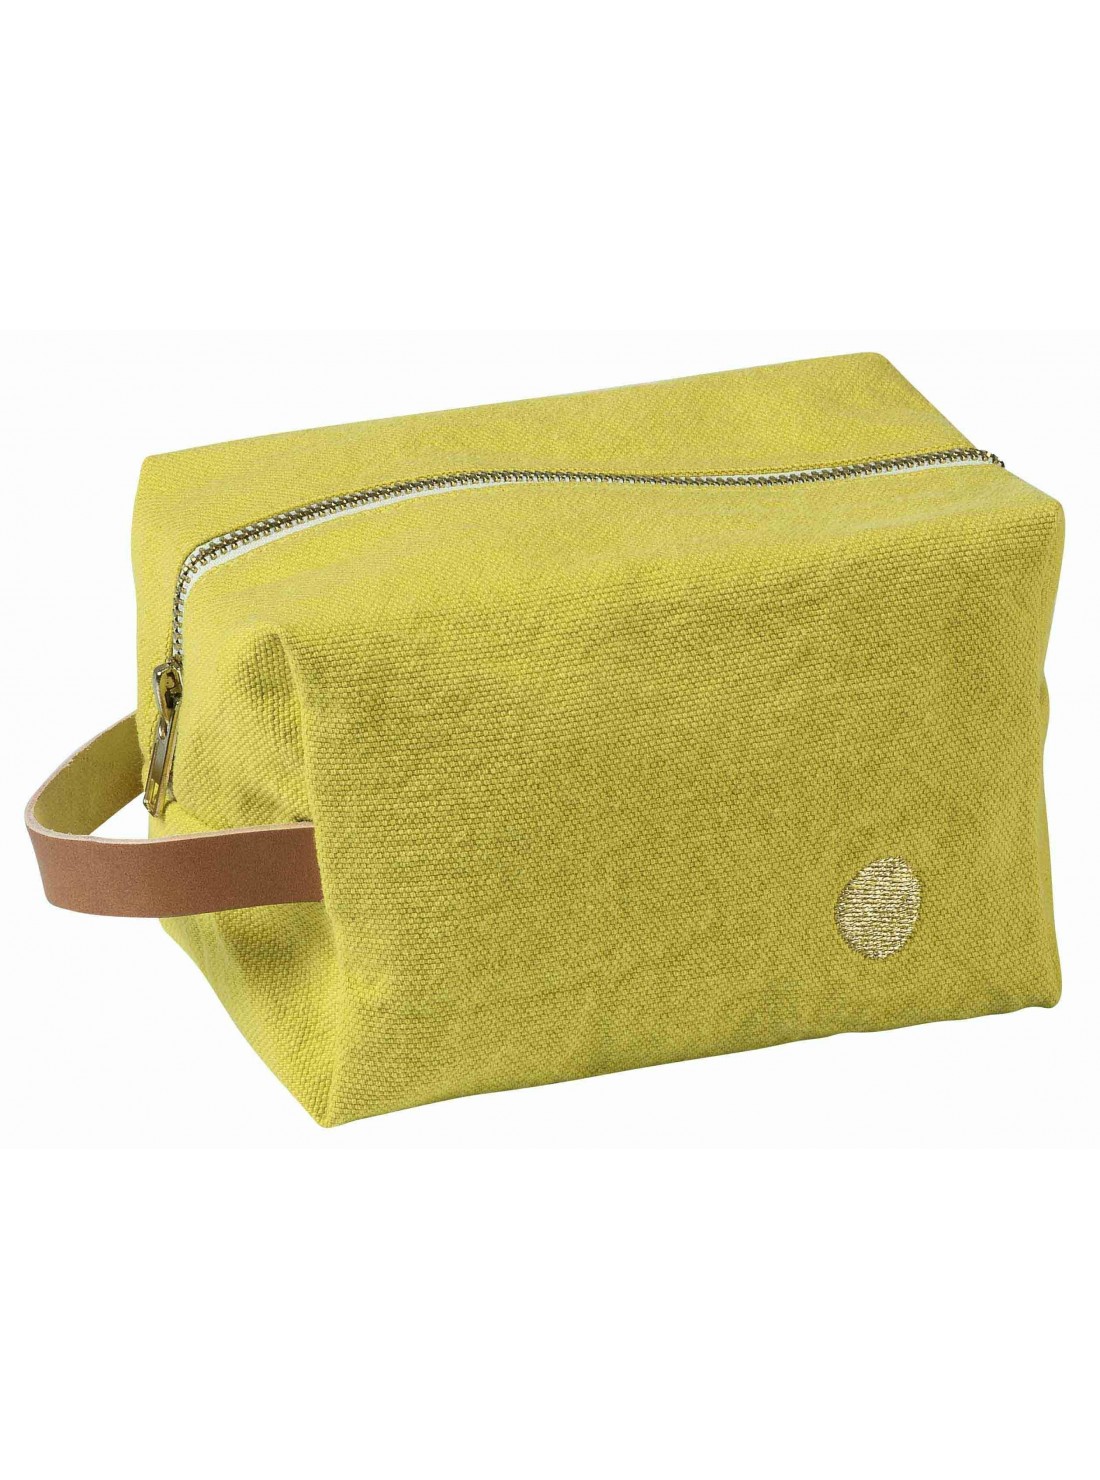 POUCH CUBE IONA RHUBARBE PM